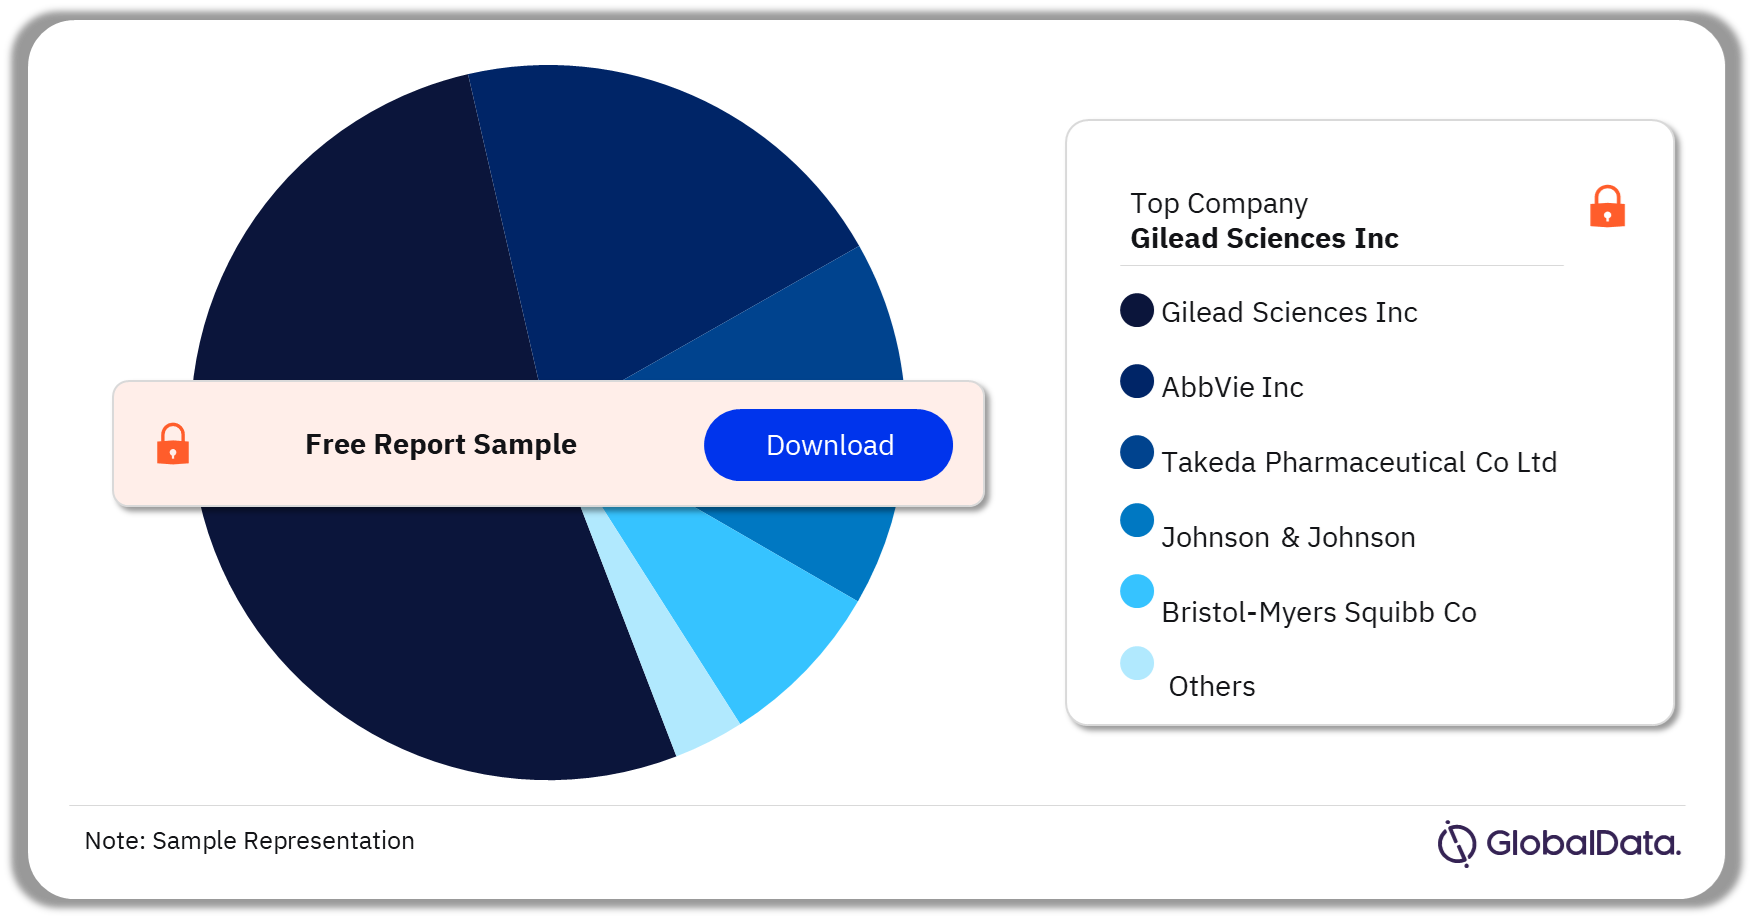 Waldenstrom Macroglobulinemia Clinical Trials Analysis by Leading Companies, 2023 (%)